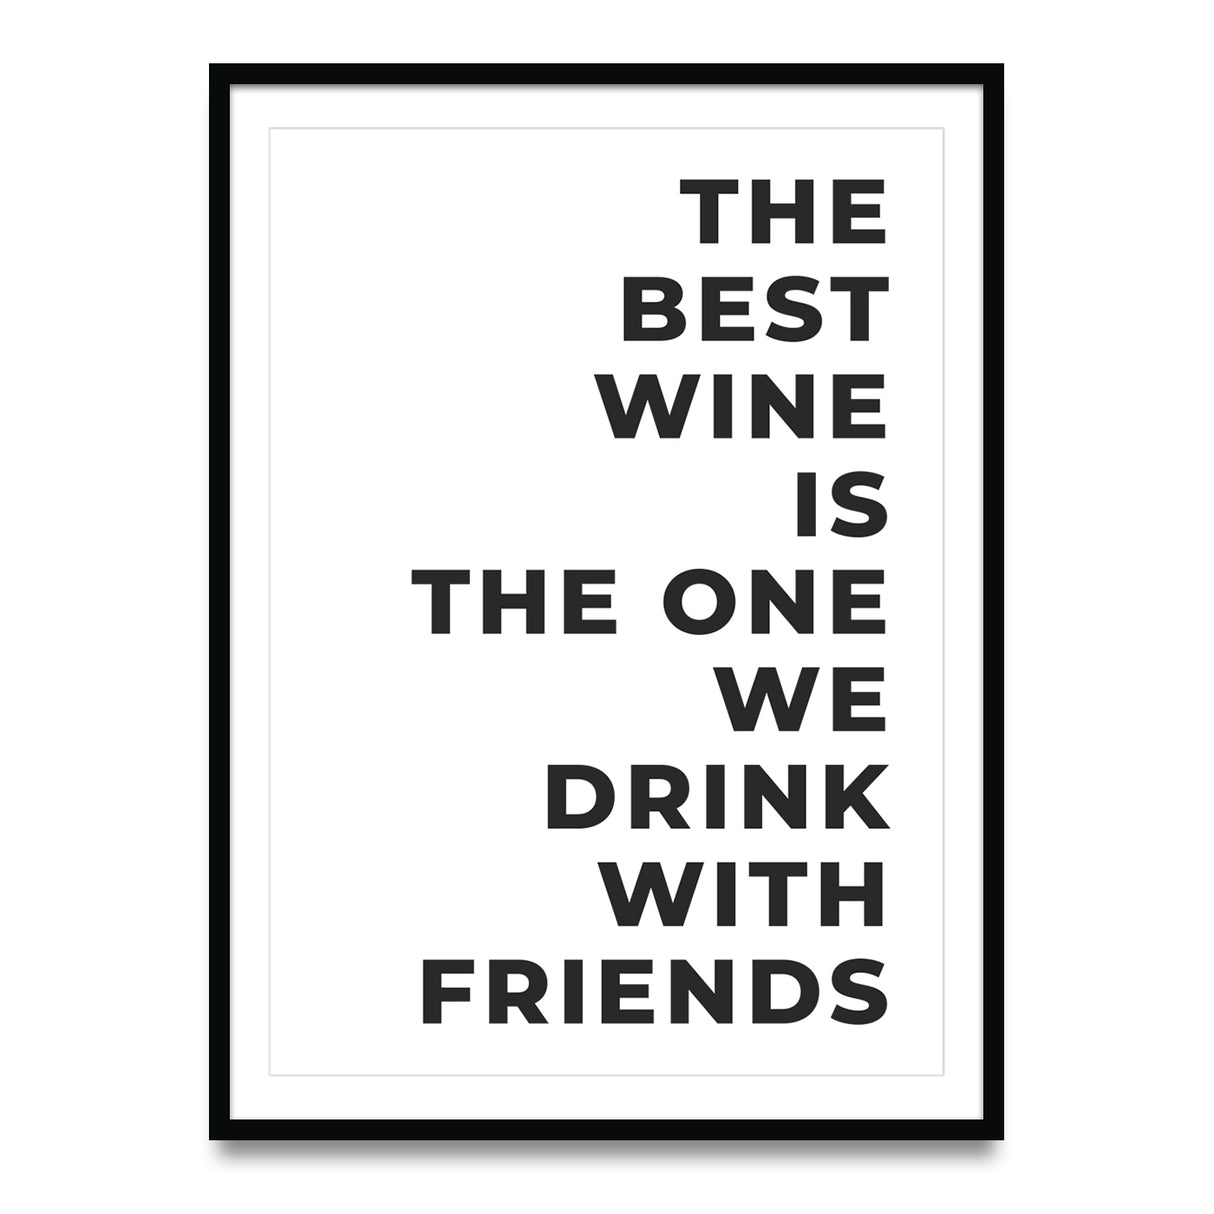 The best wine is the one we drink with friends - Poster